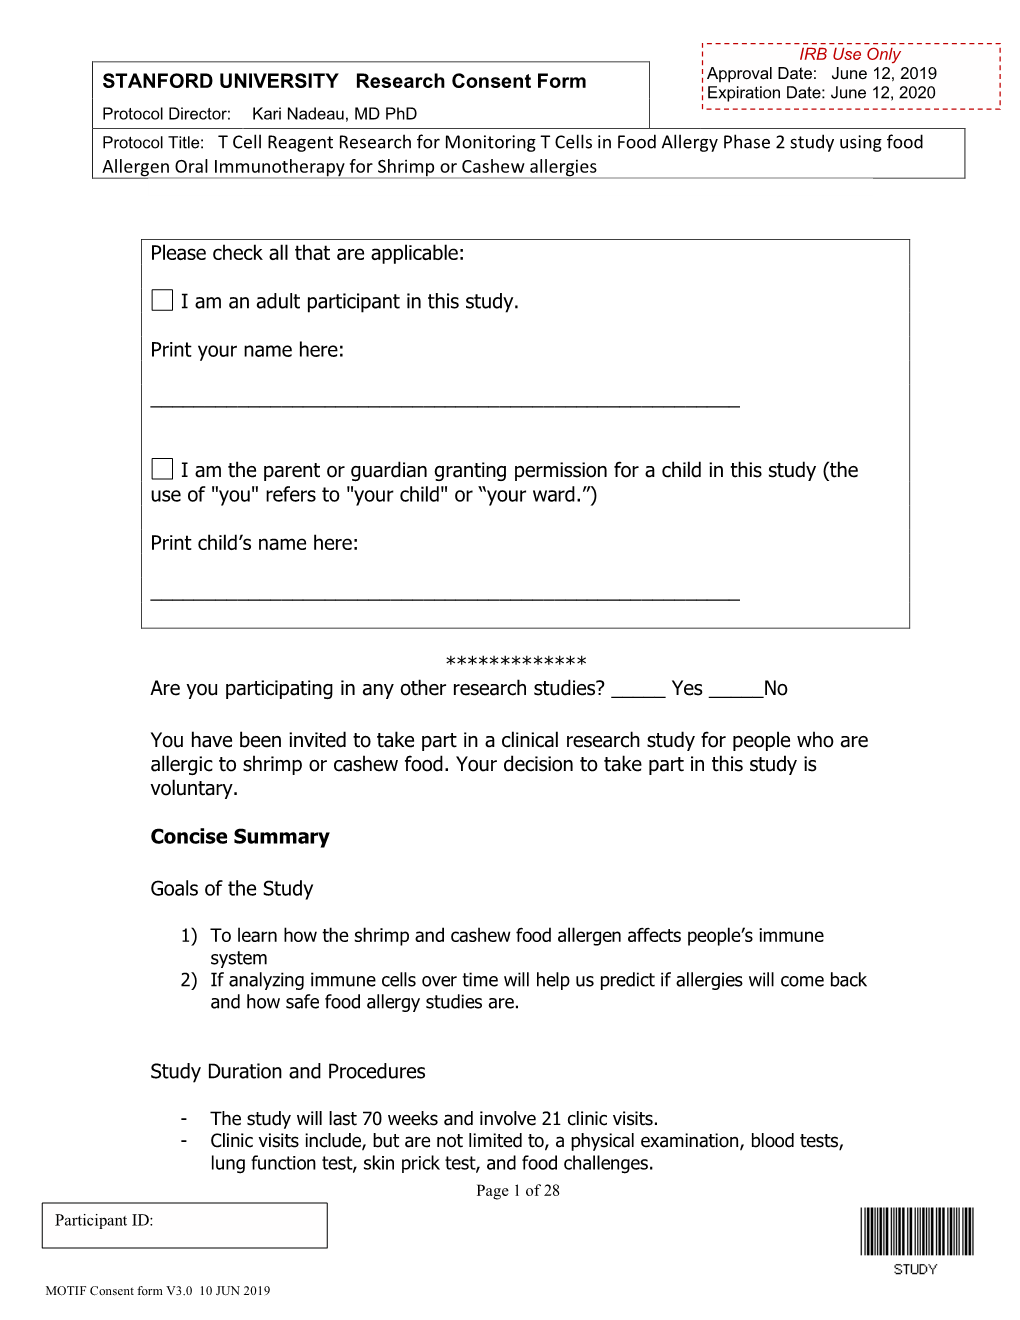 STANFORD UNIVERSITY Research Consent Form Protocol Title